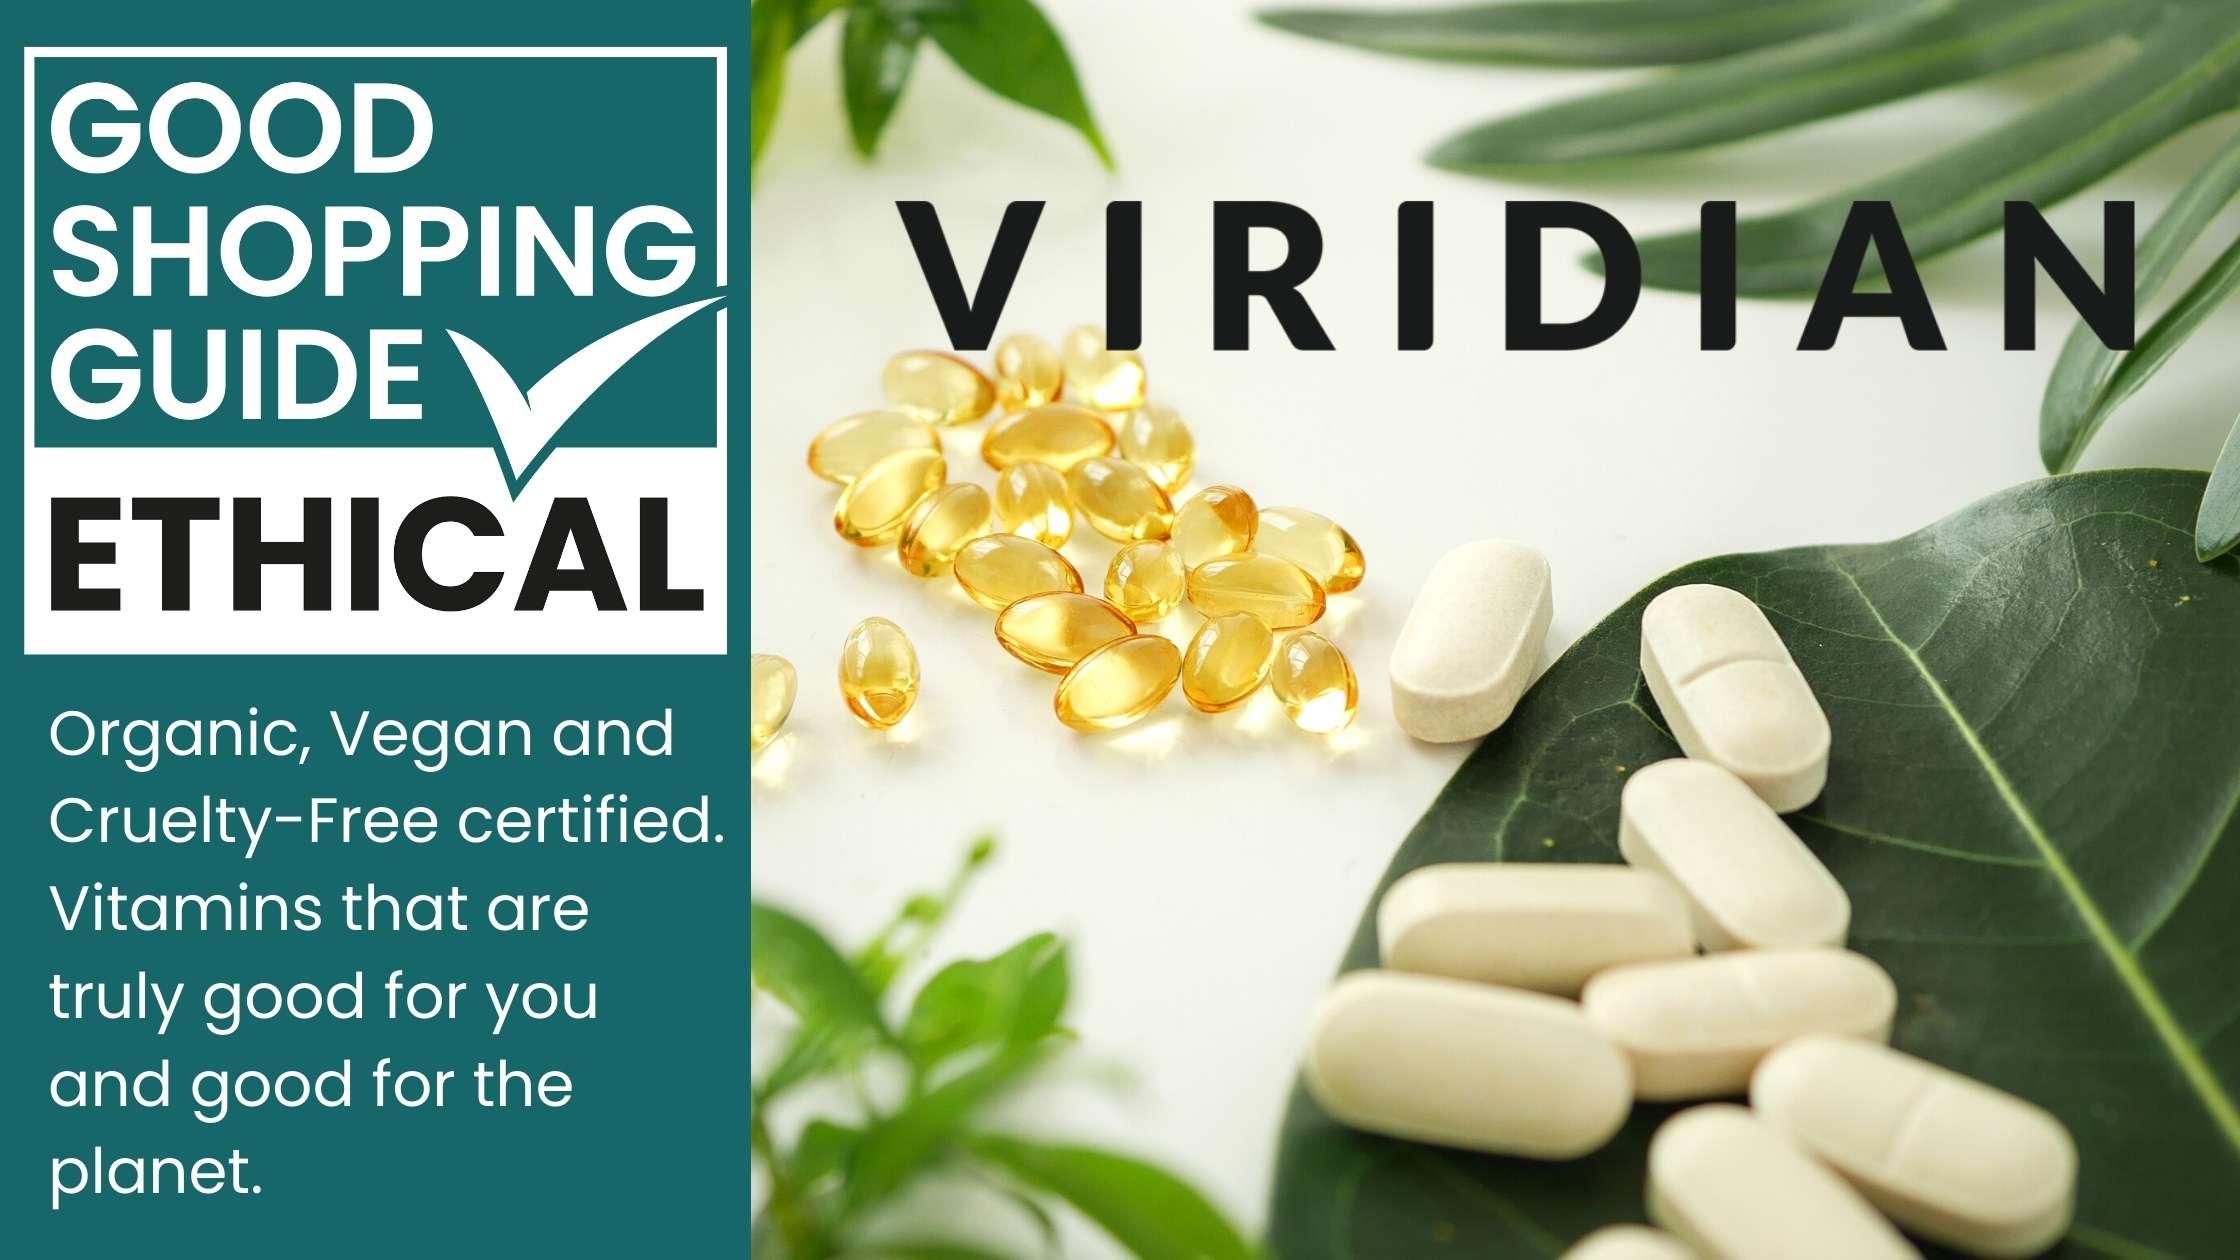 Viridian Nutrition ethical company accreditation from The Good Shopping Guide